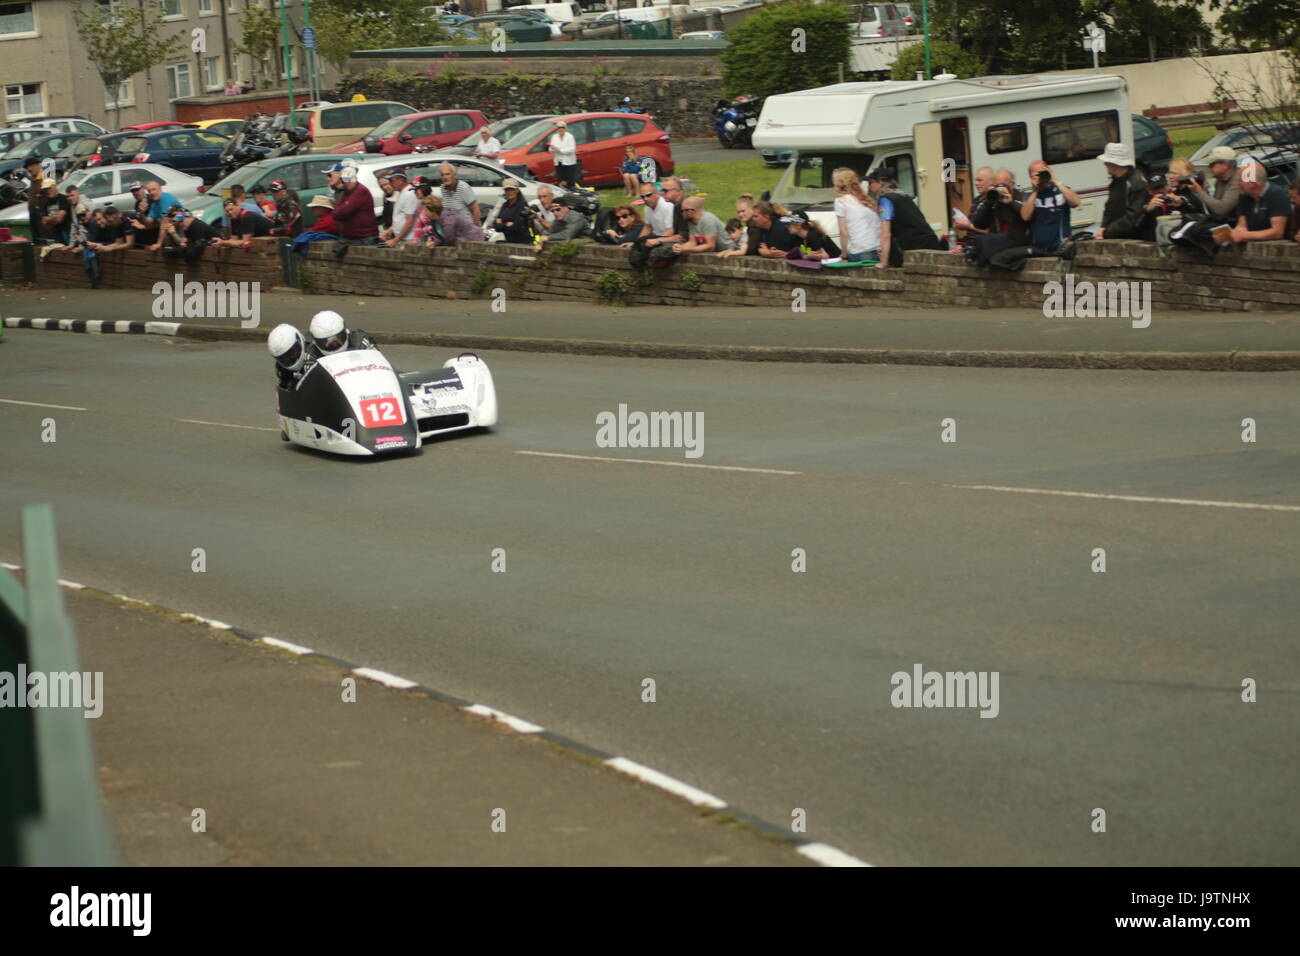 Isle of Man TT Races, Qualifying Practice Race, Saturday 3 June 2017. Sidecar Qualifying session. Number 12, Wayne Lockey and Mark Sayers on their 600cc Ireson Honda of the Real Racing team from Leeds, uk.   Credit: Eclectic Art and Photography/Alamy Live News. Stock Photo